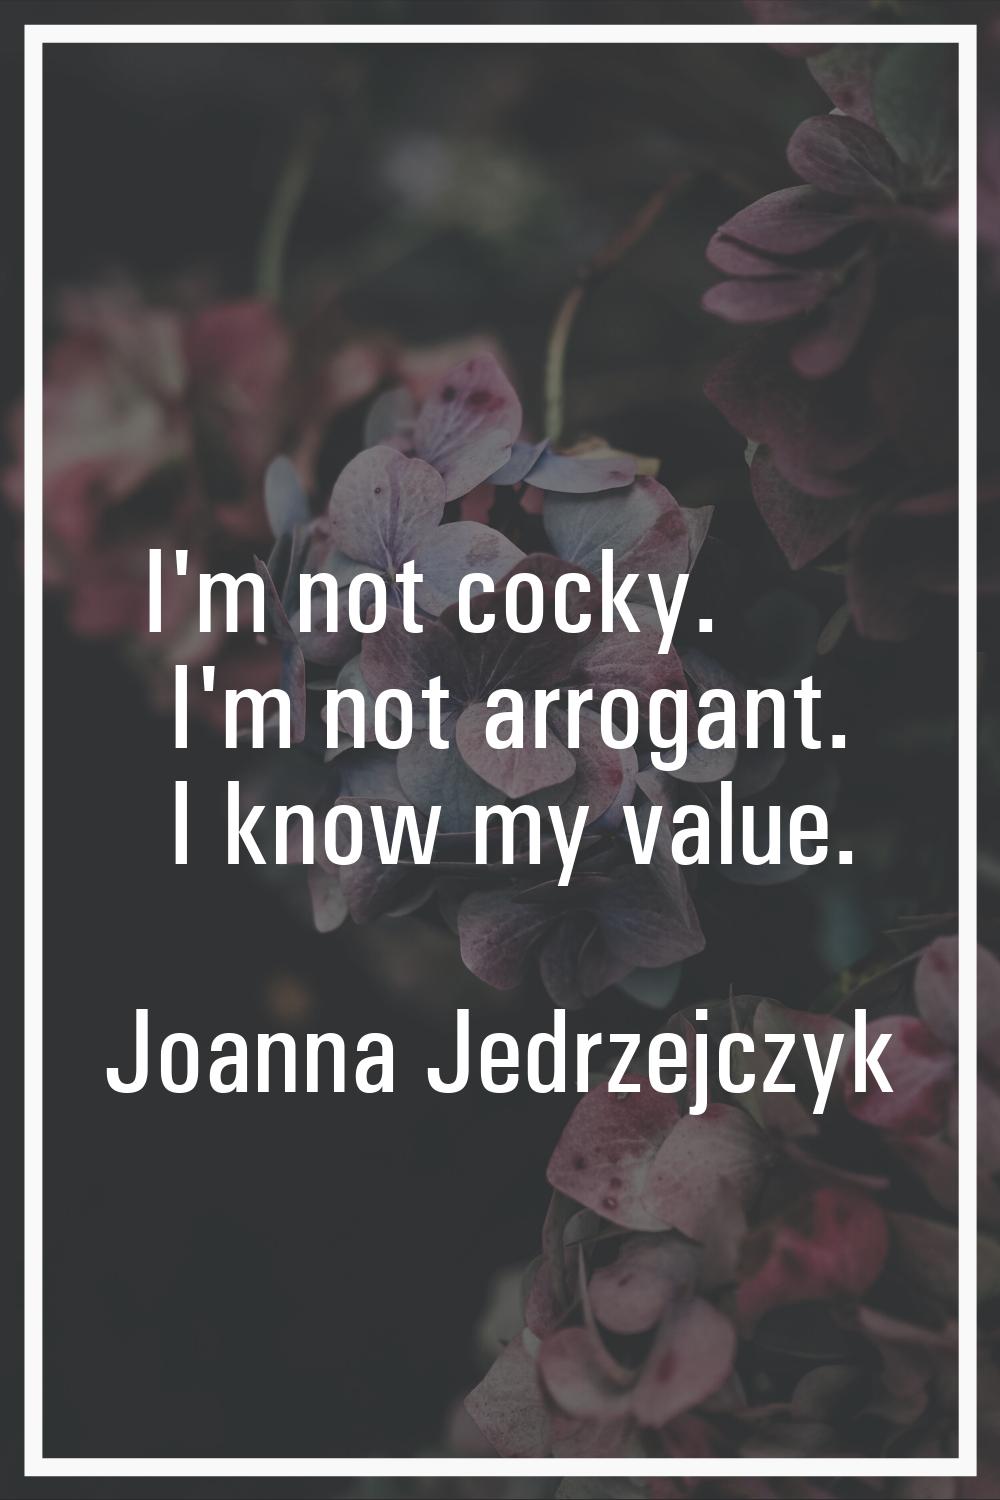 I'm not cocky. I'm not arrogant. I know my value.